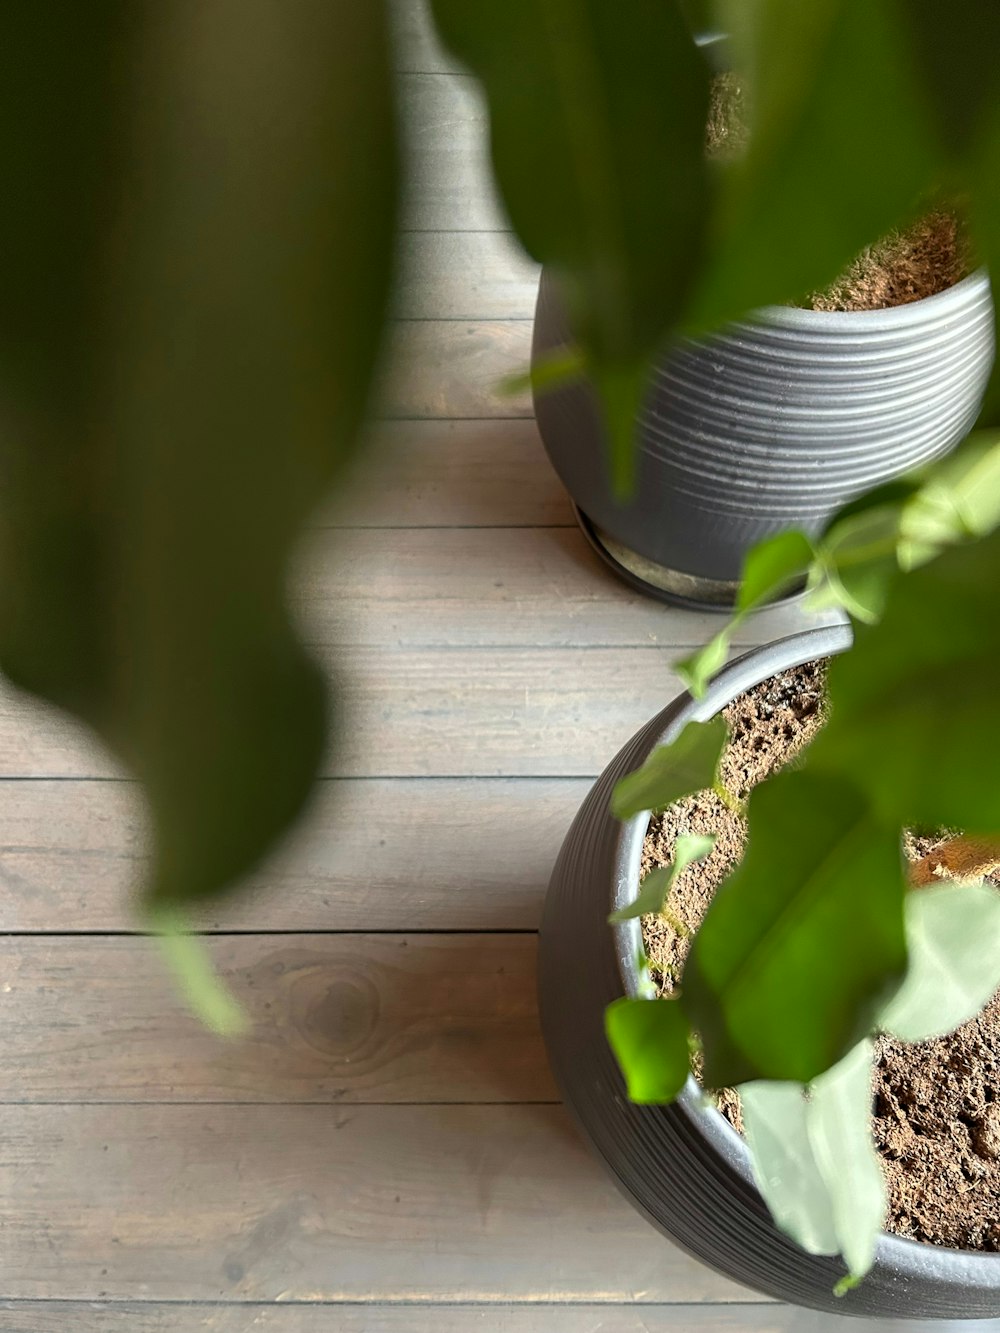 a close up of a potted plant on a wooden floor